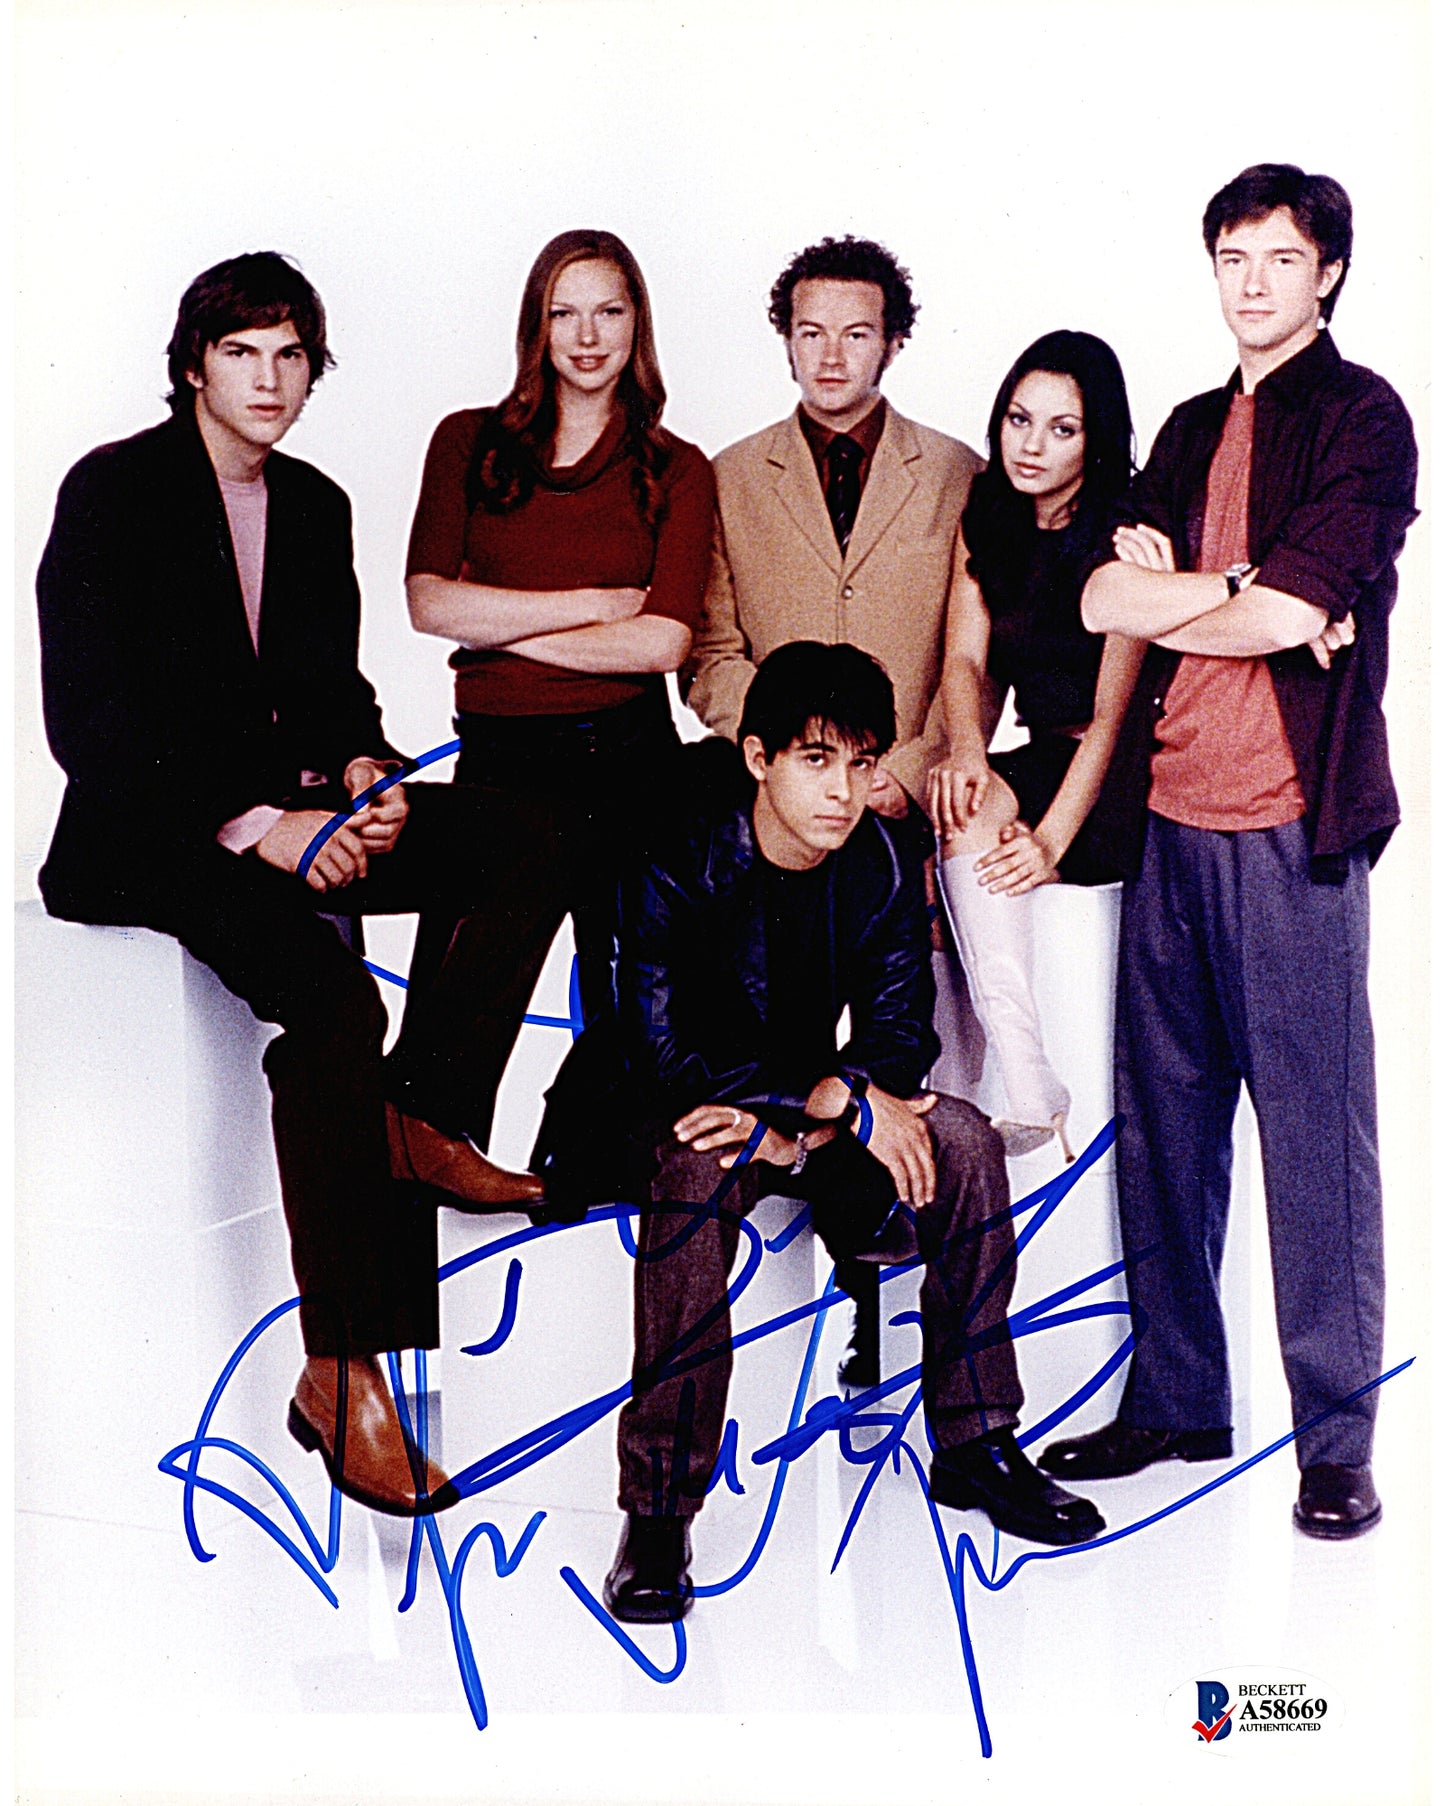 Hollywood- Autographed- That 70's Show 8x10 Photo Signed by Danny Masterson - Laura Prepon - Mila Kunis - Wilmer Valderrama - Beckett BAS Authentication A58669 - 102